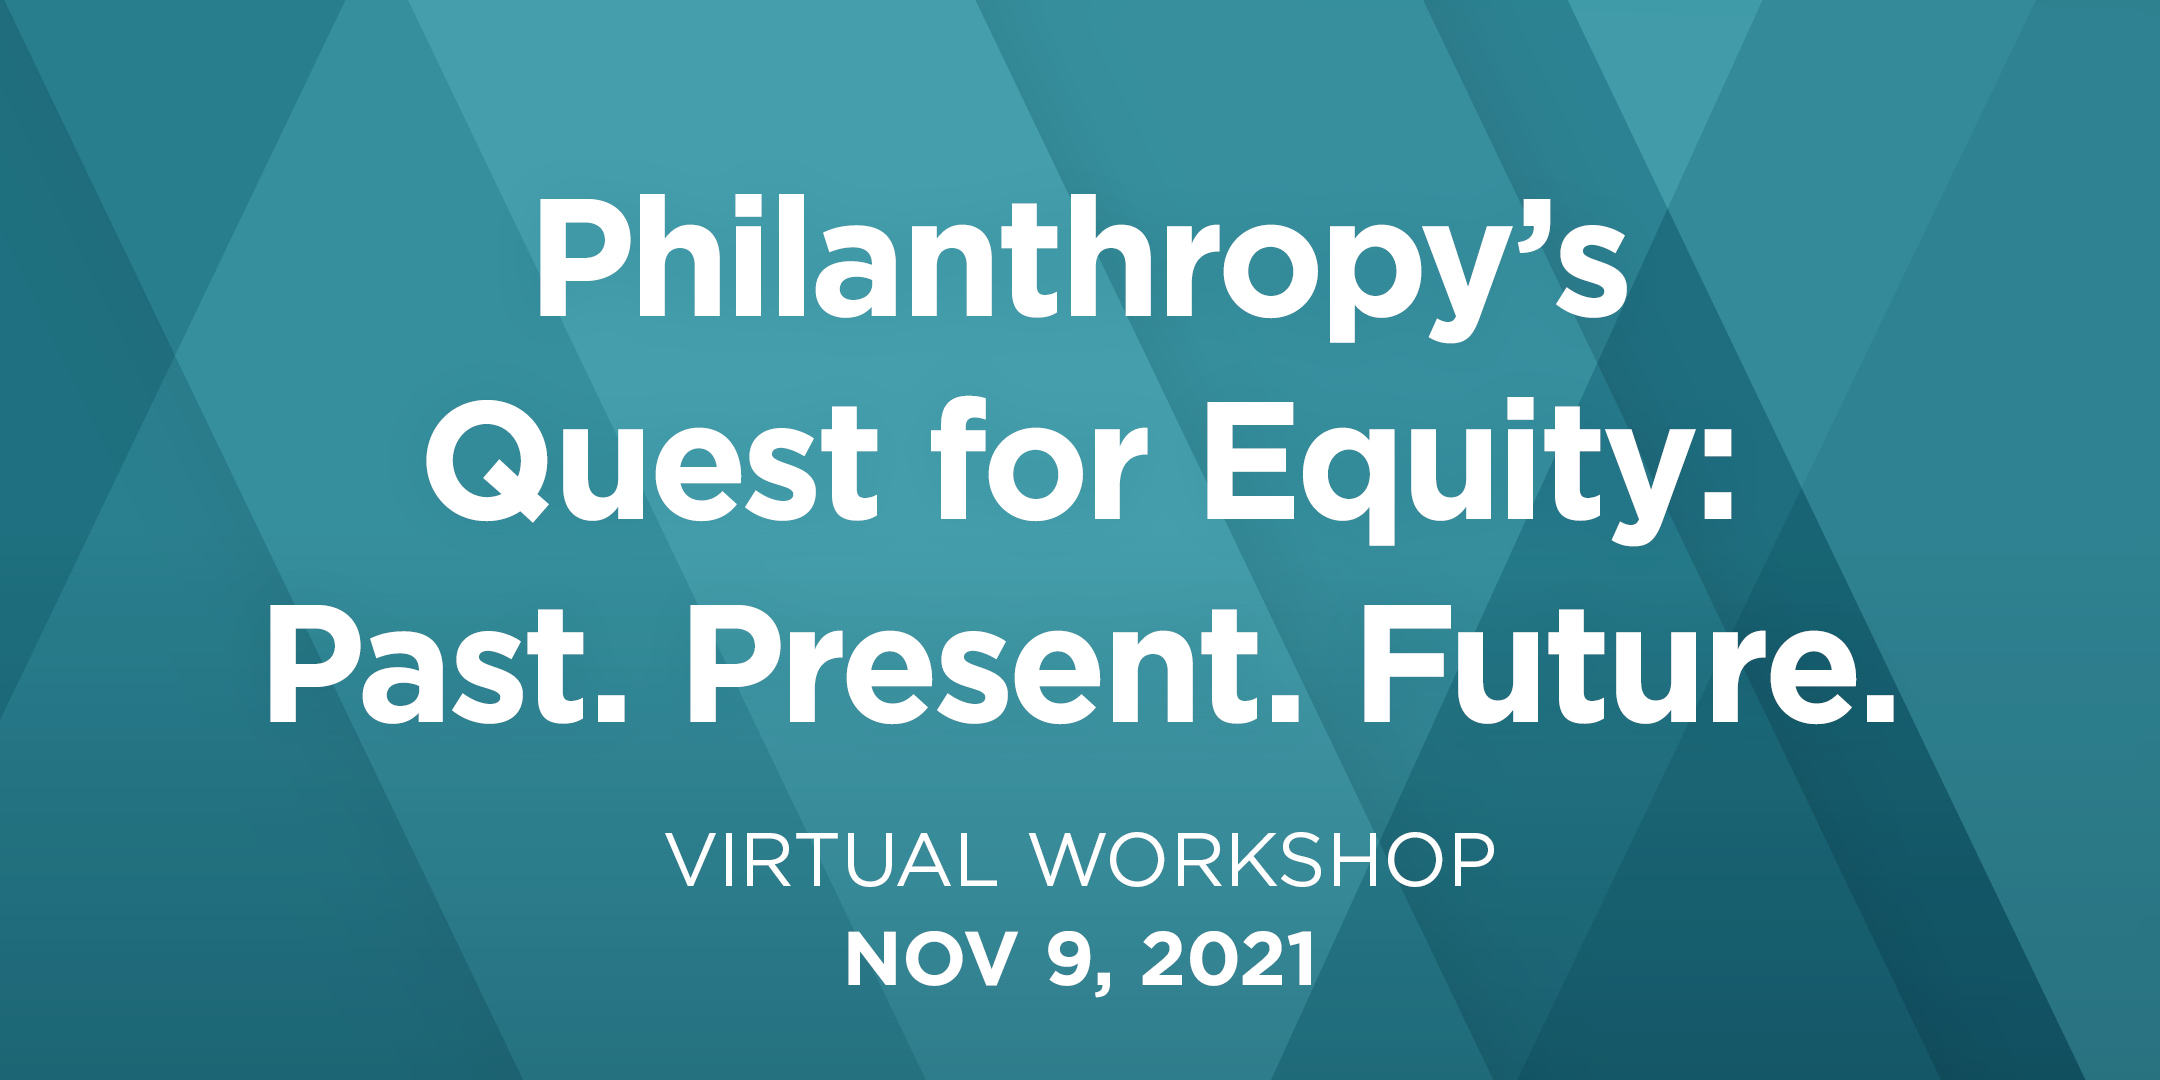 Philanthropy's Quest for Equity: Past. Present. Future.